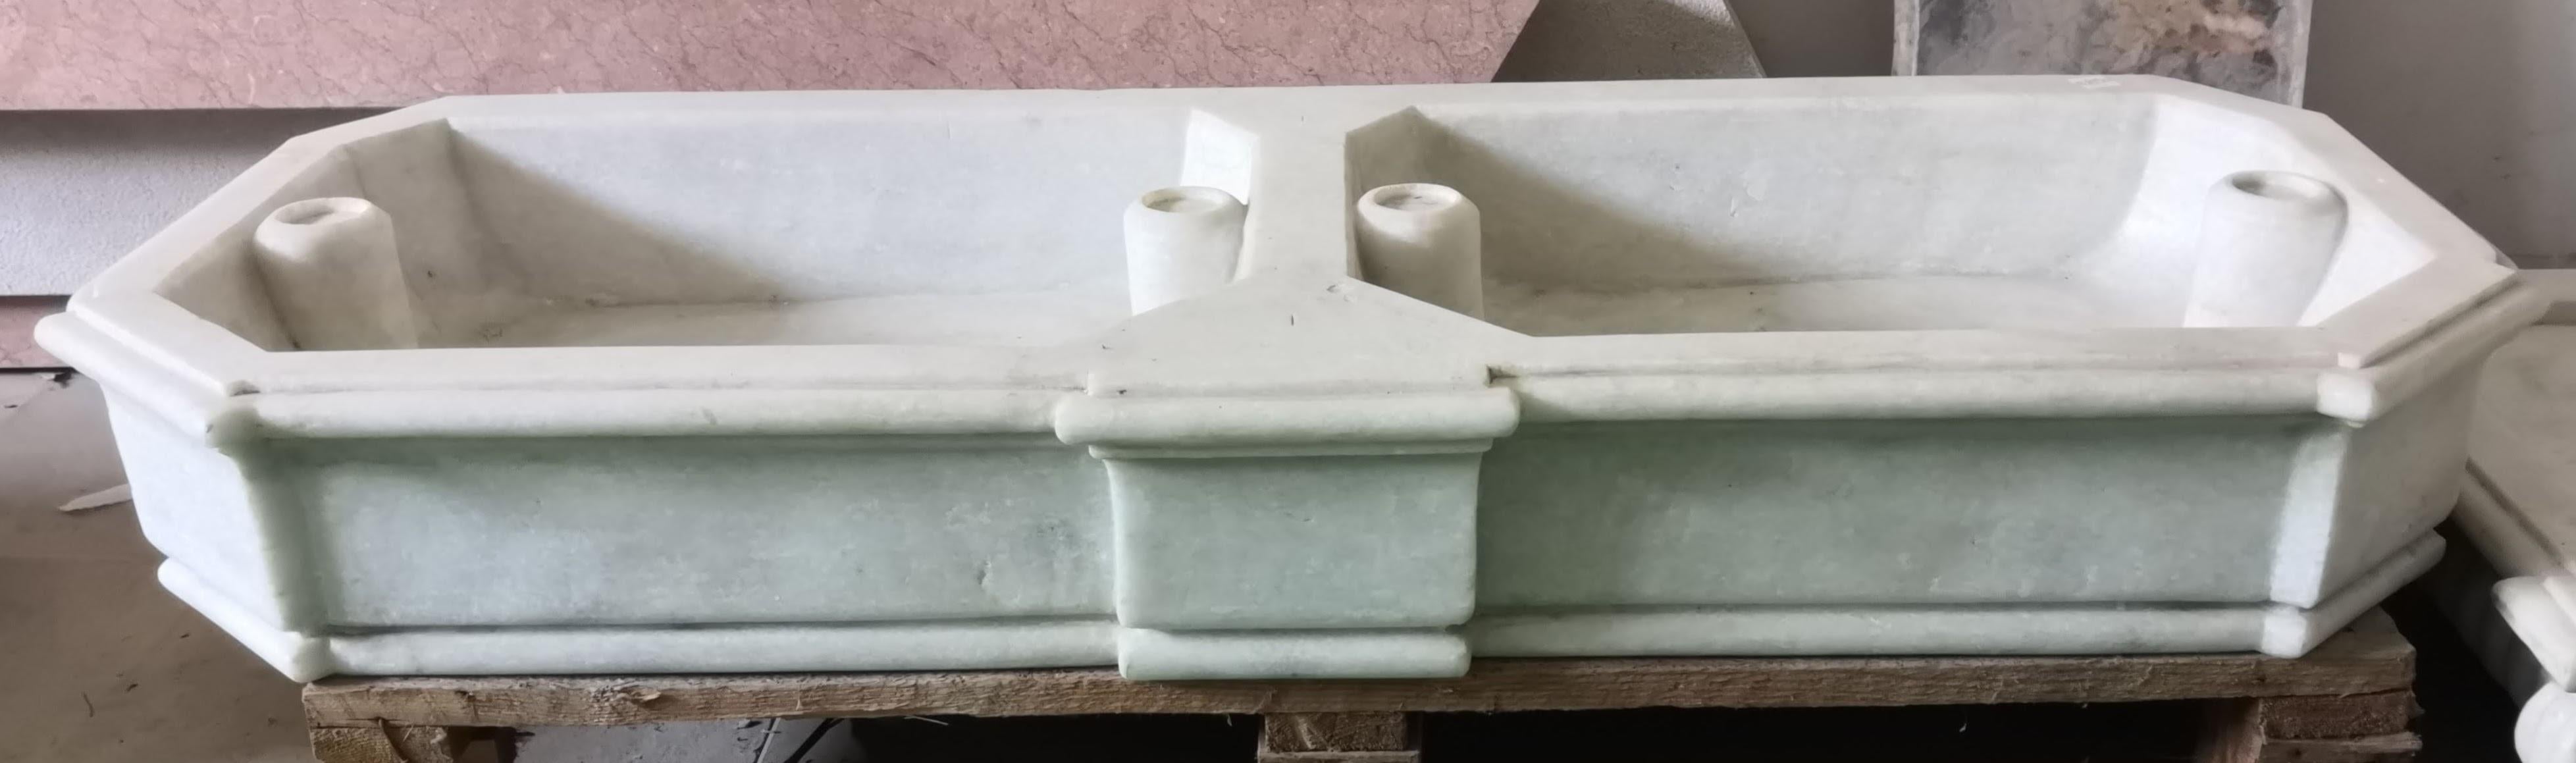 Carved Carrara Marble Double Kitchen Sink Basin For Sale